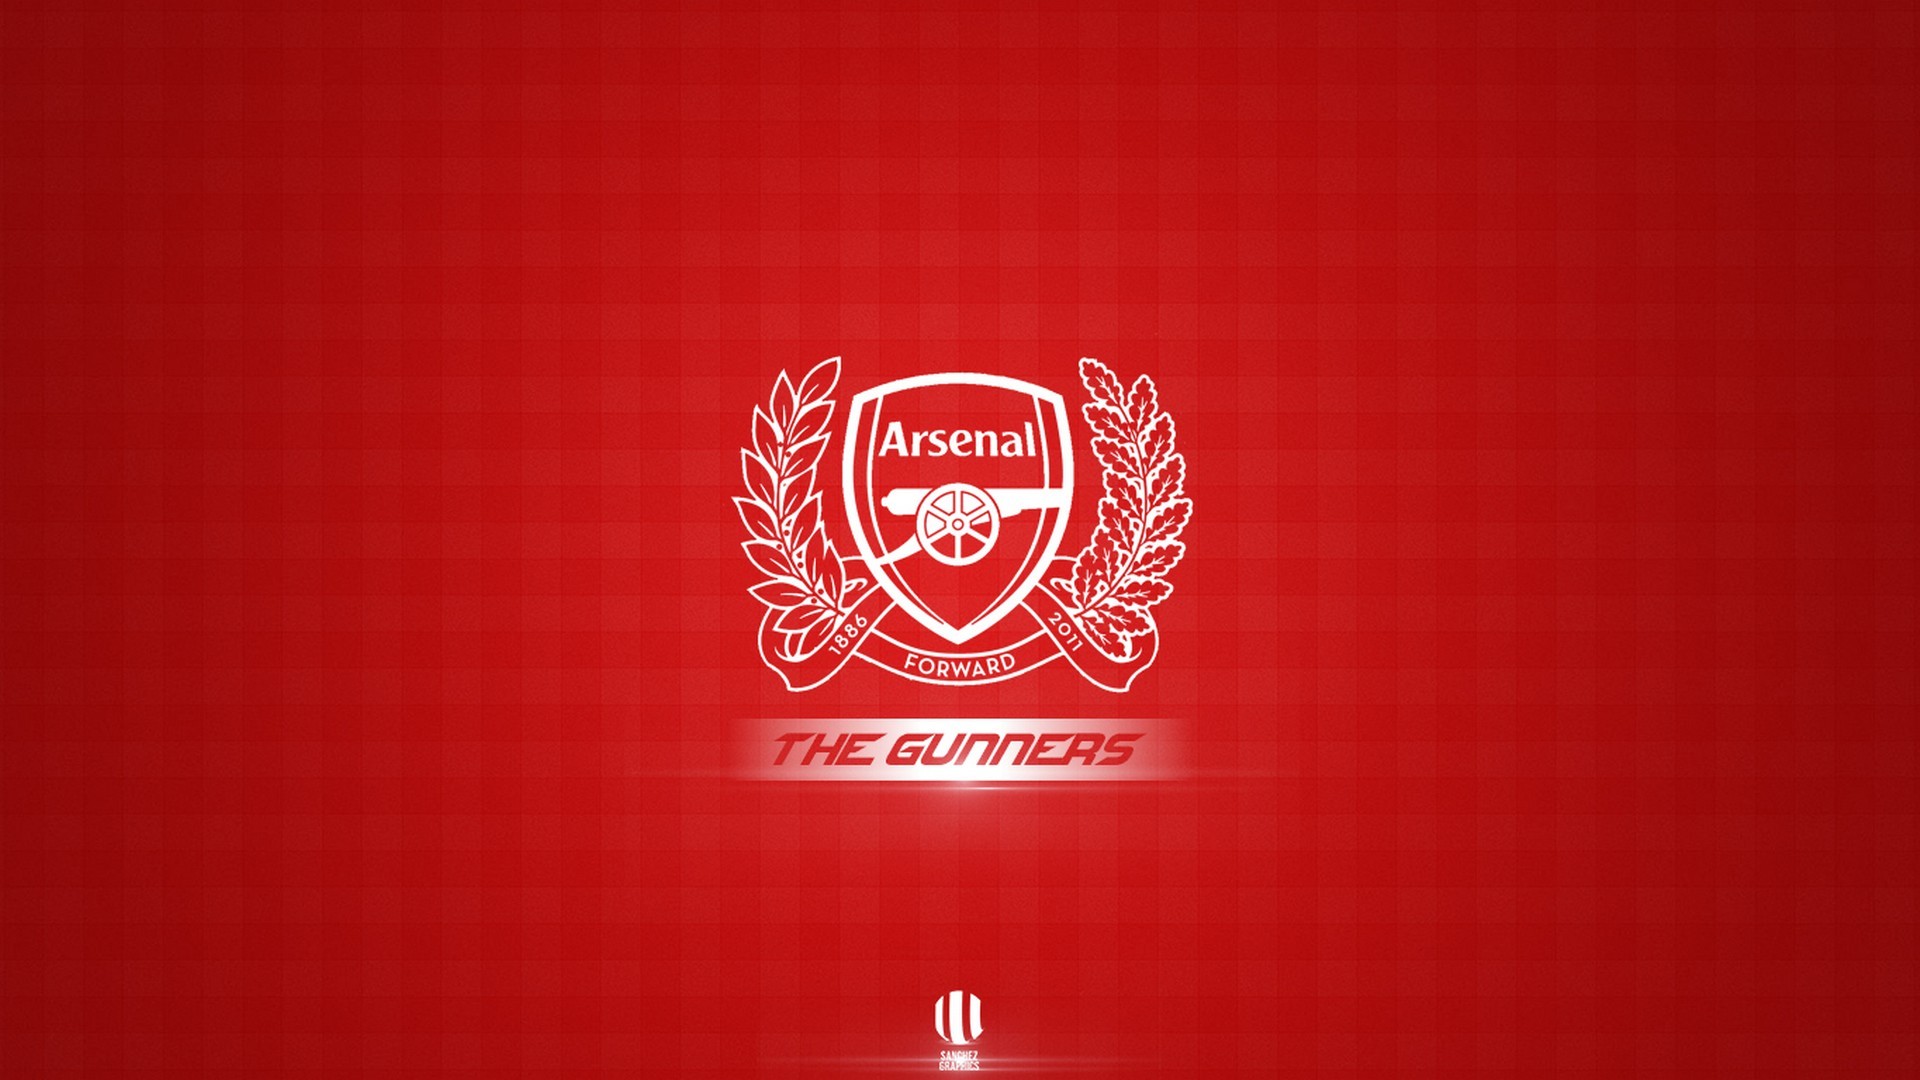 HD Arsenal Backgrounds with resolution 1920x1080 pixel. You can make this wallpaper for your Mac or Windows Desktop Background, iPhone, Android or Tablet and another Smartphone device